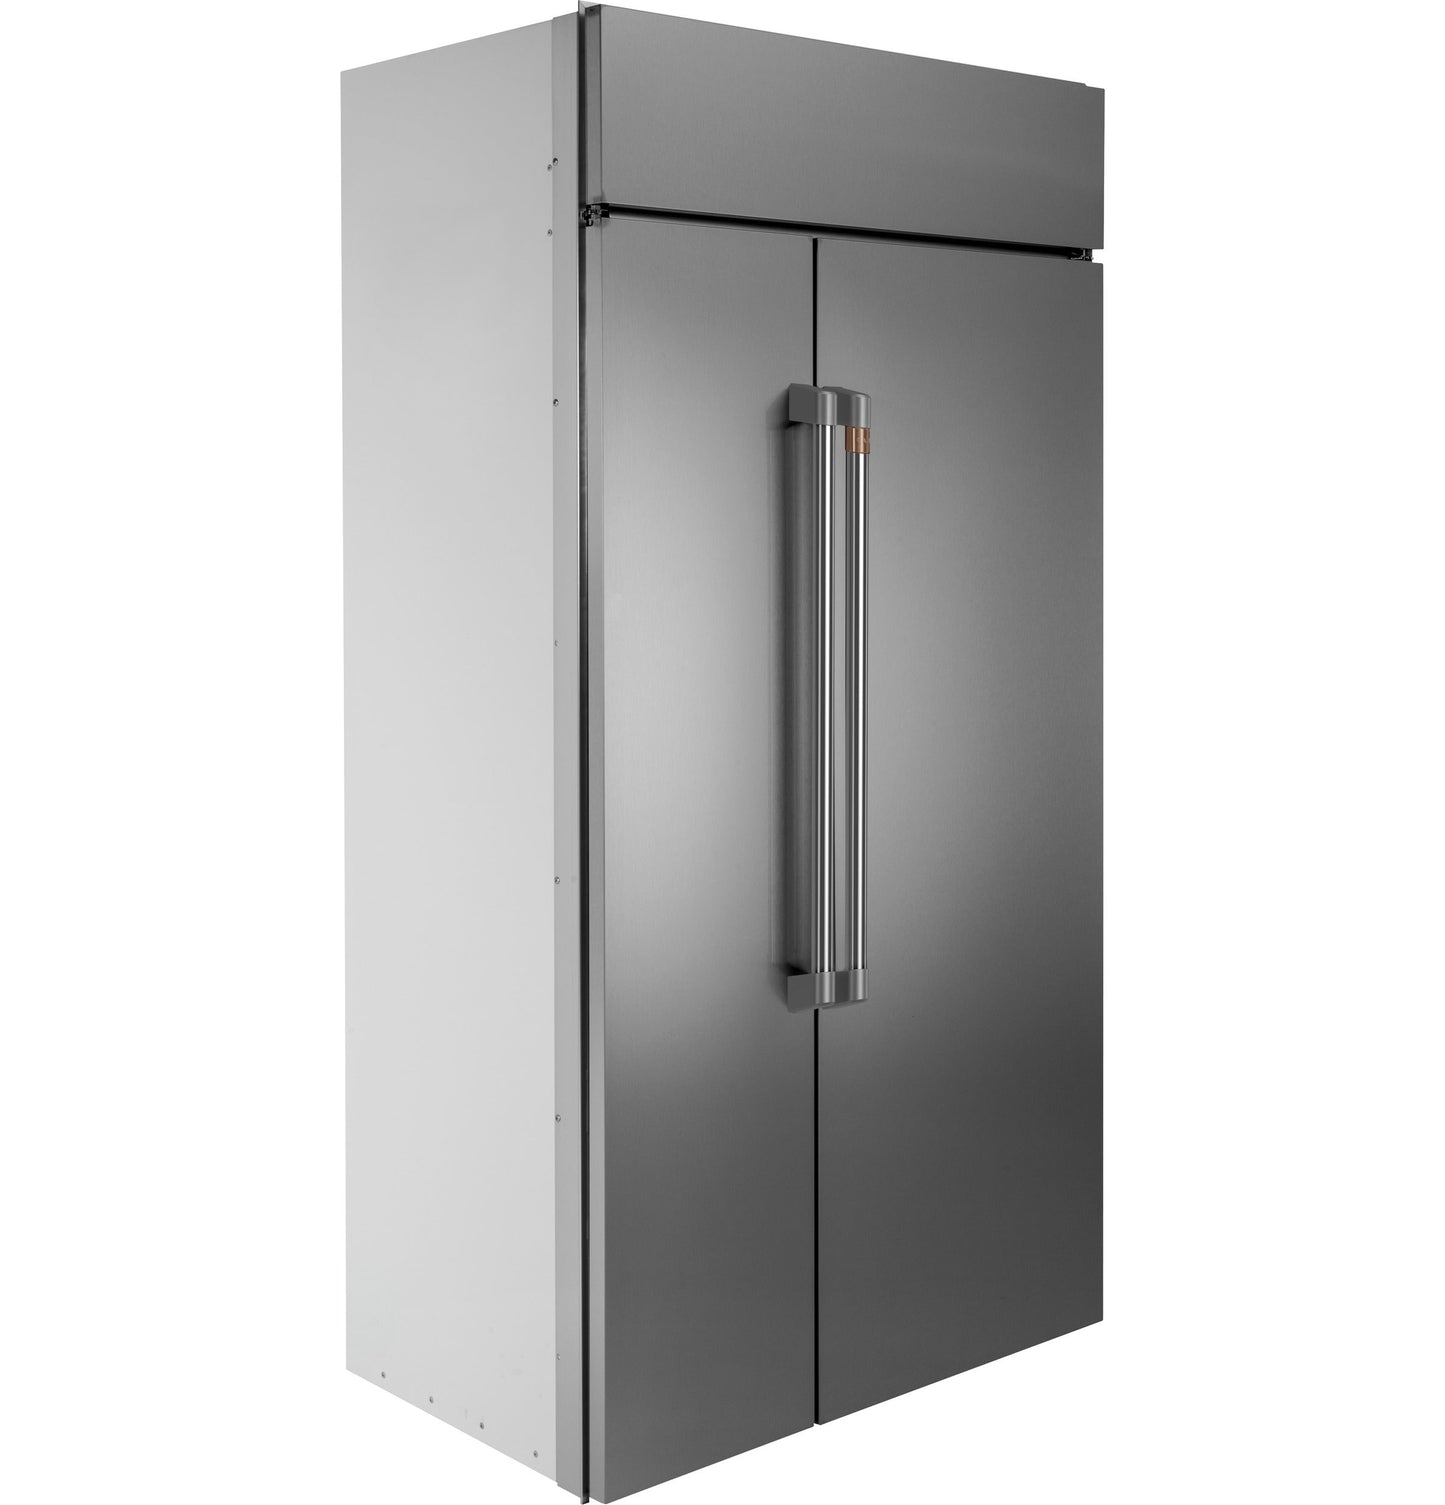 Café 48" Built-In Side-by-Side Refrigerator Stainless Steel - CSB48WP2NS1